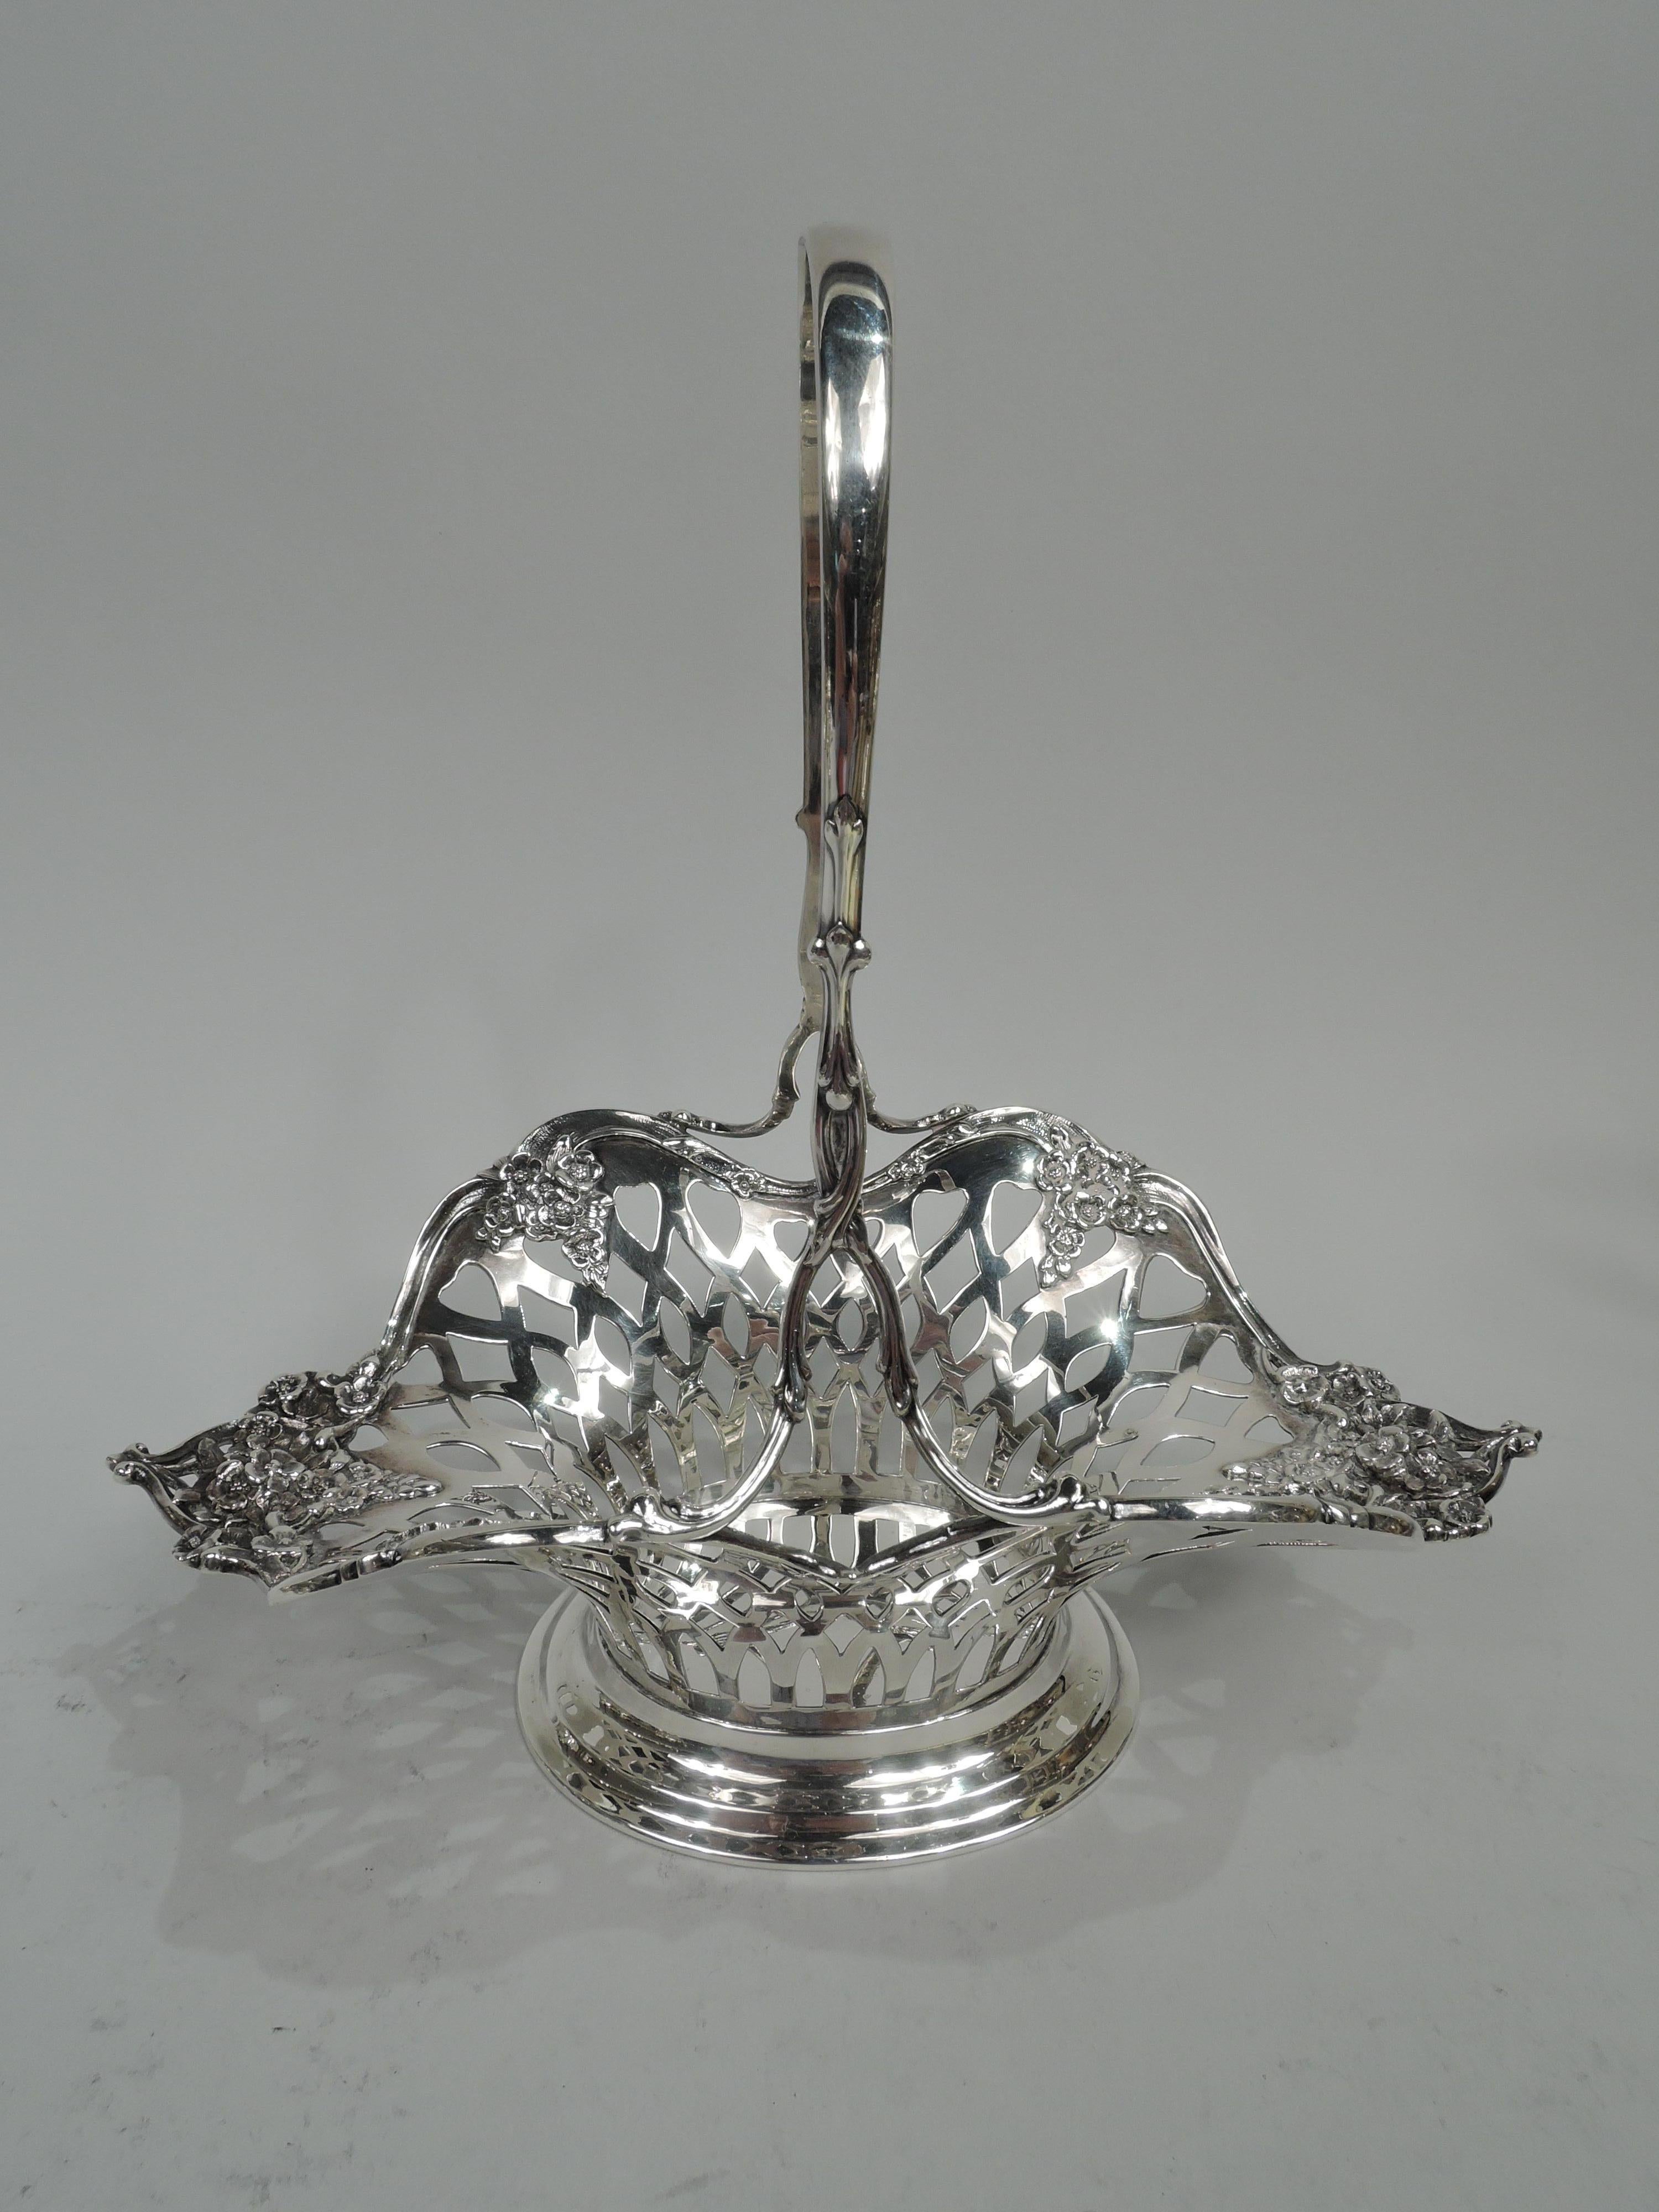 Pretty Edwardian sterling silver basket. Made by Tiffany & Co. in New York. Solid oval well and open weave-style sides with clusters of applied pendant flowers. Ends splayed. Scrolled rim. Tall and fixed c-scroll handle with entwined and split